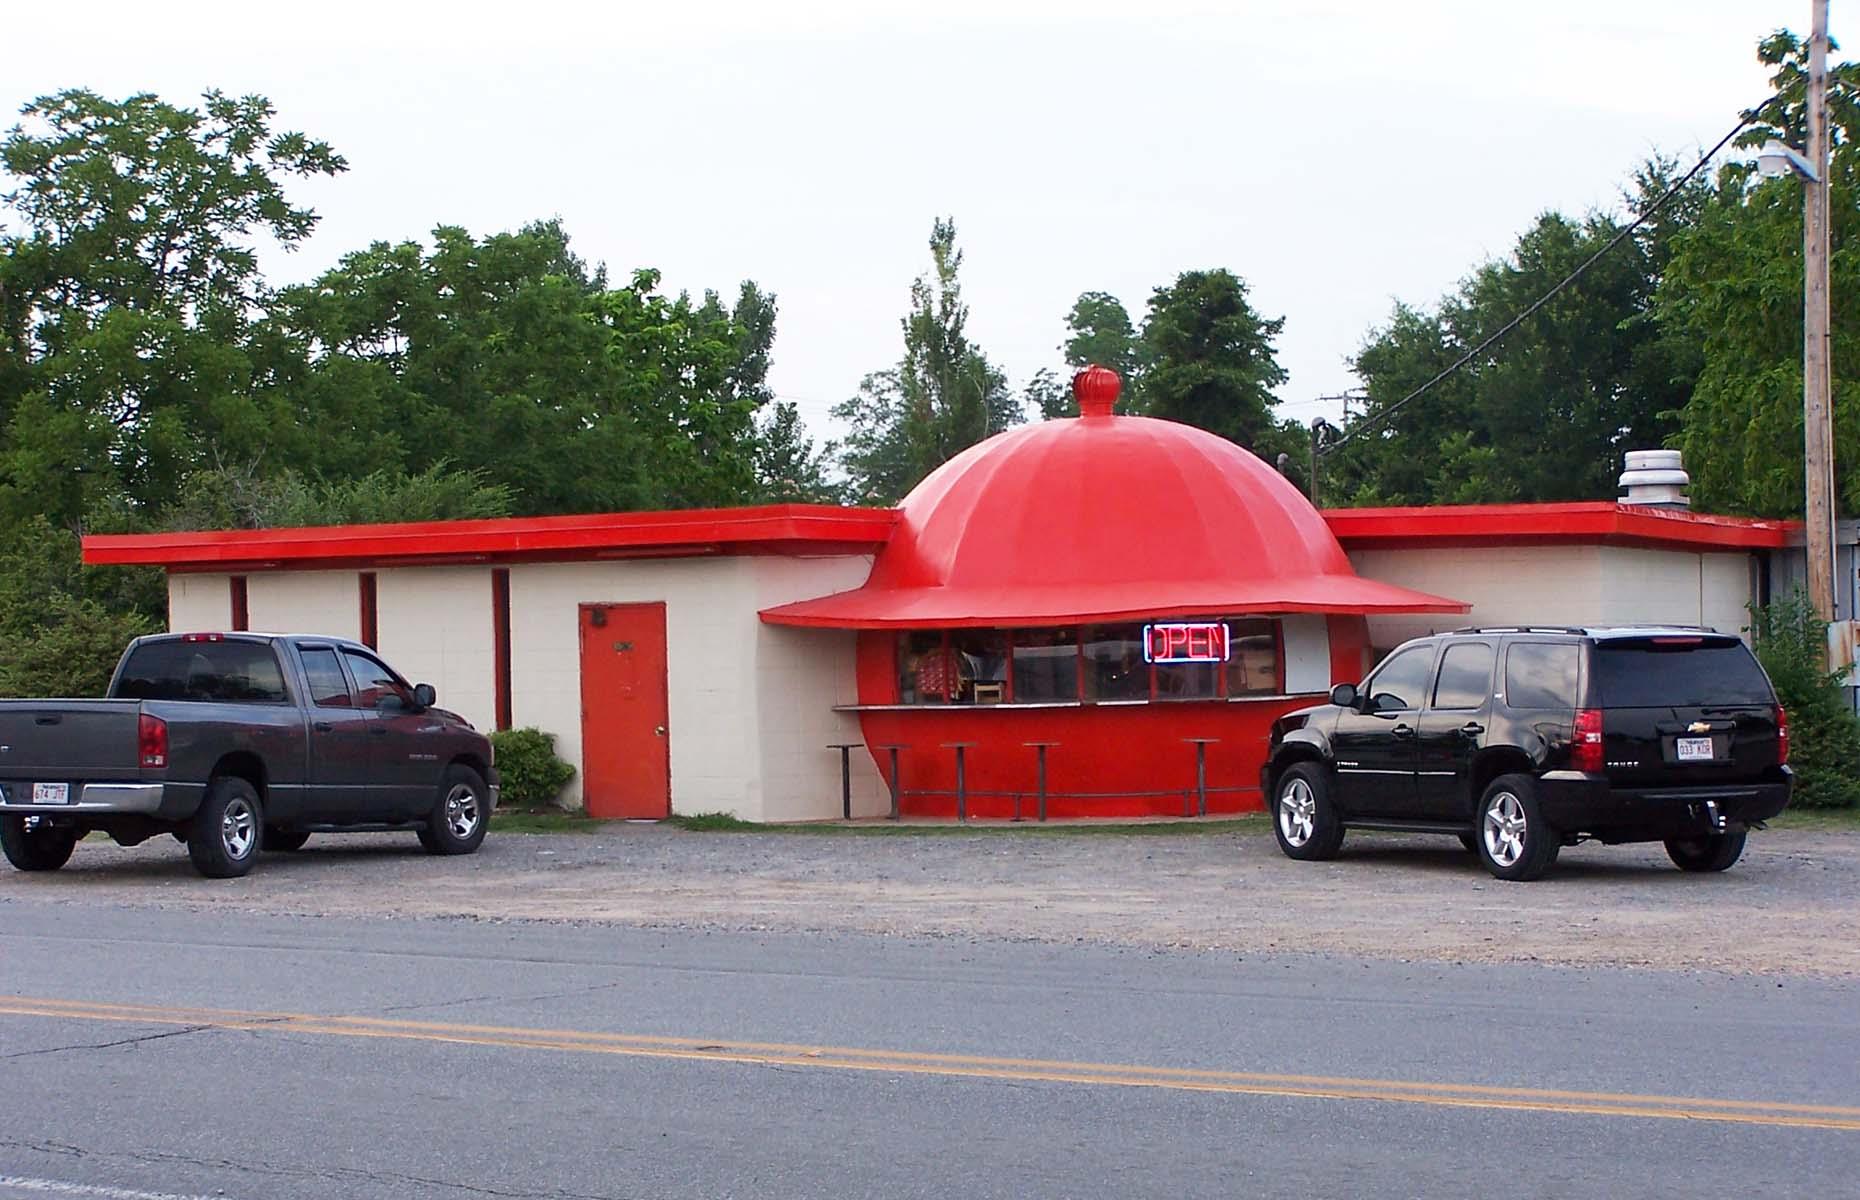 <p>While driving through Redfield, halfway between Little Rock and Pine Bluff, you’ll find the Mammoth Orange Cafe, which has been a roadside pit-stop <a href="https://www.arkansas.com/redfield/attractions-culture/mammoth-orange-cafe">since 1966</a>. Live out your retro dreams and stop by the domed diner for <a href="https://www.yelp.com/biz/mammoth-orange-cafe-redfield-2">the best</a> hamburgers, hot dogs, chili dogs and Cajun fries around.</p>  <p><strong><a href="https://www.lovefood.com/galleries/69989/the-worlds-most-beautiful-historic-cafes?page=1">Now check out the most beautiful historic cafés in the world</a></strong></p>